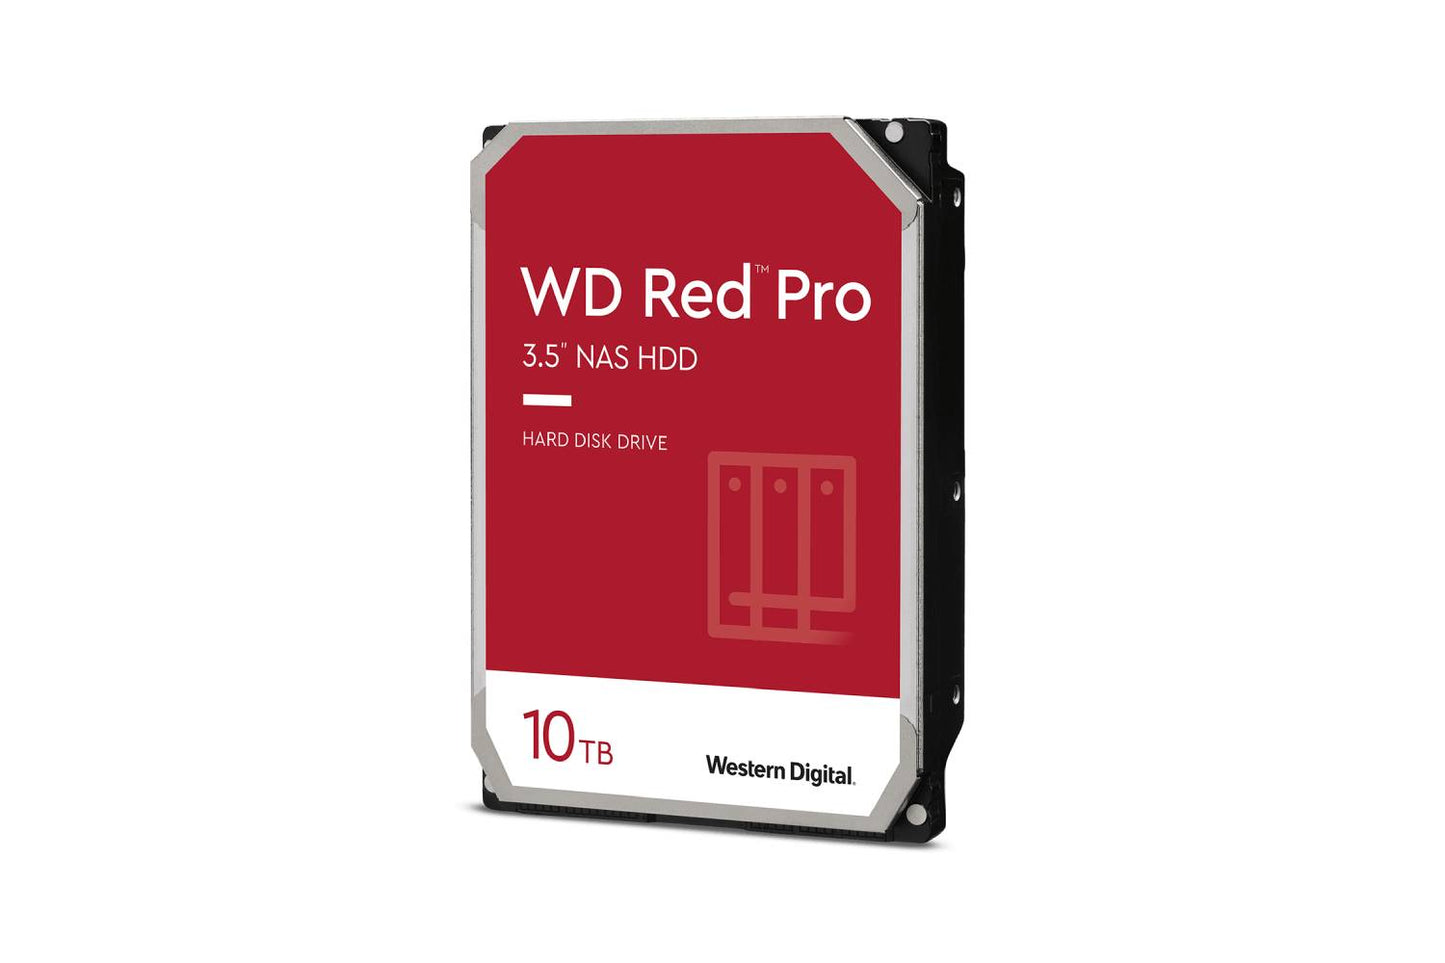 WD Red Pro 10TB NAS HDD (WD101KFBX)